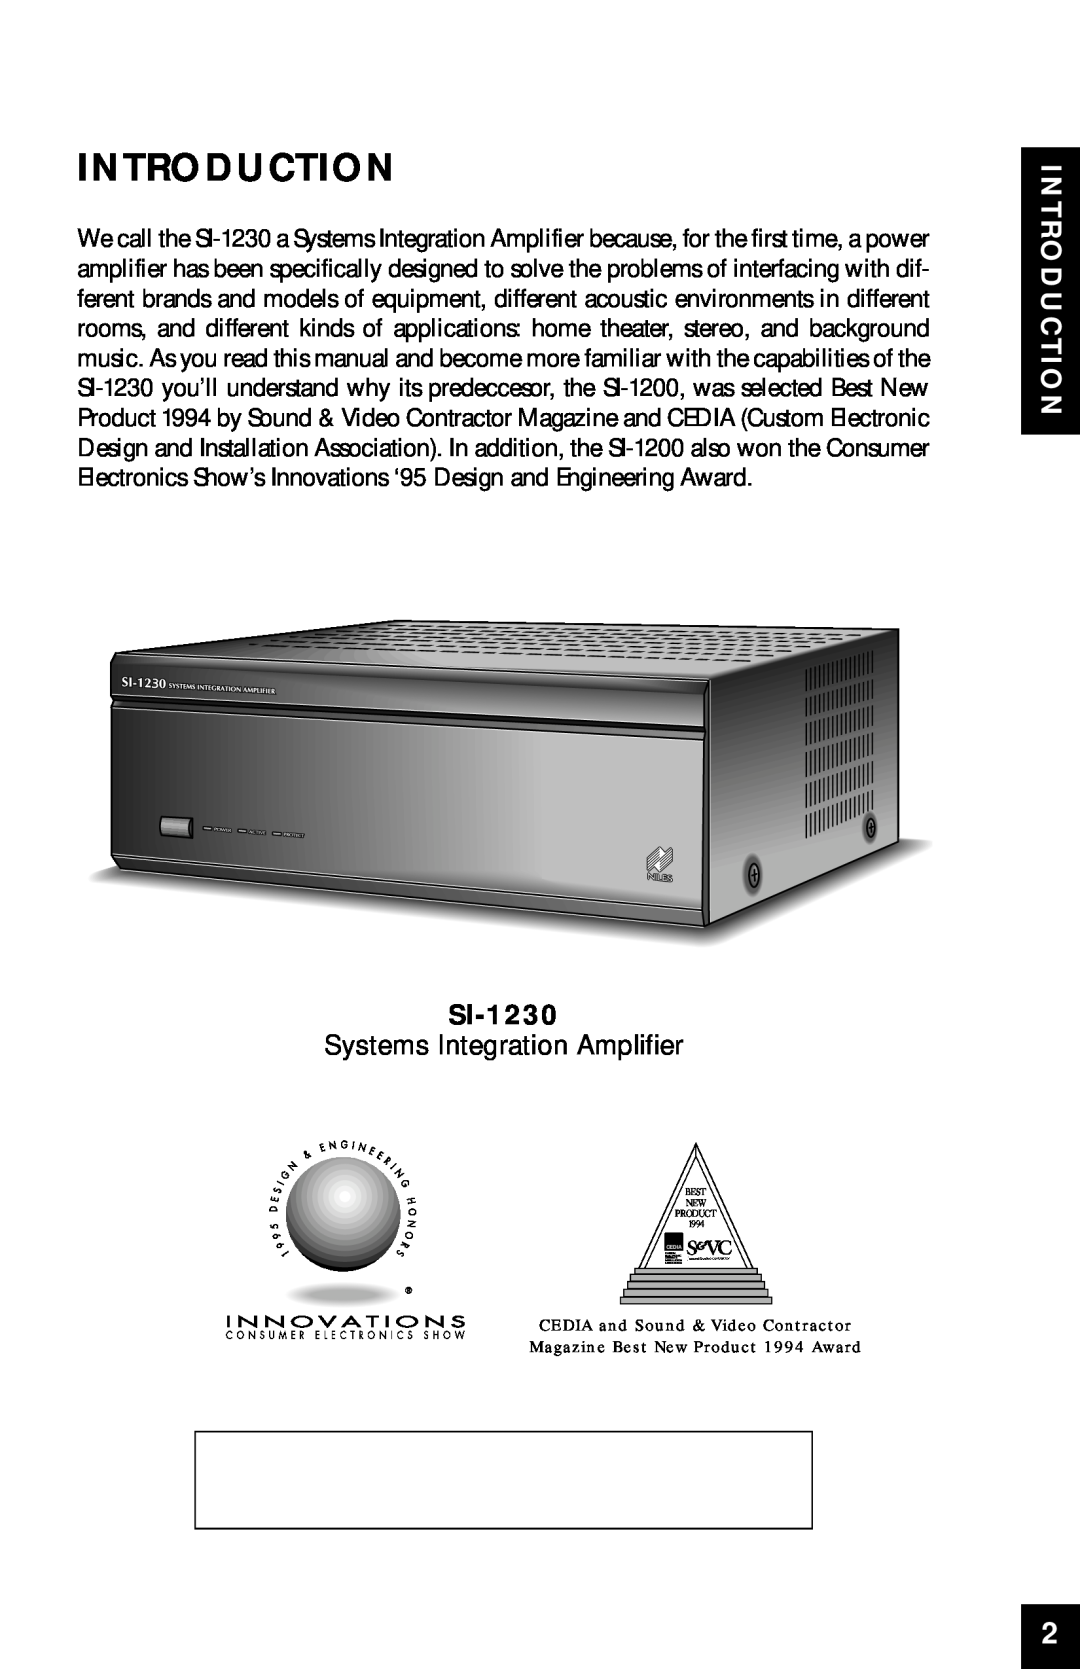 Niles Audio SI-1230 manual Introduction, Systems Integration Amplifier 